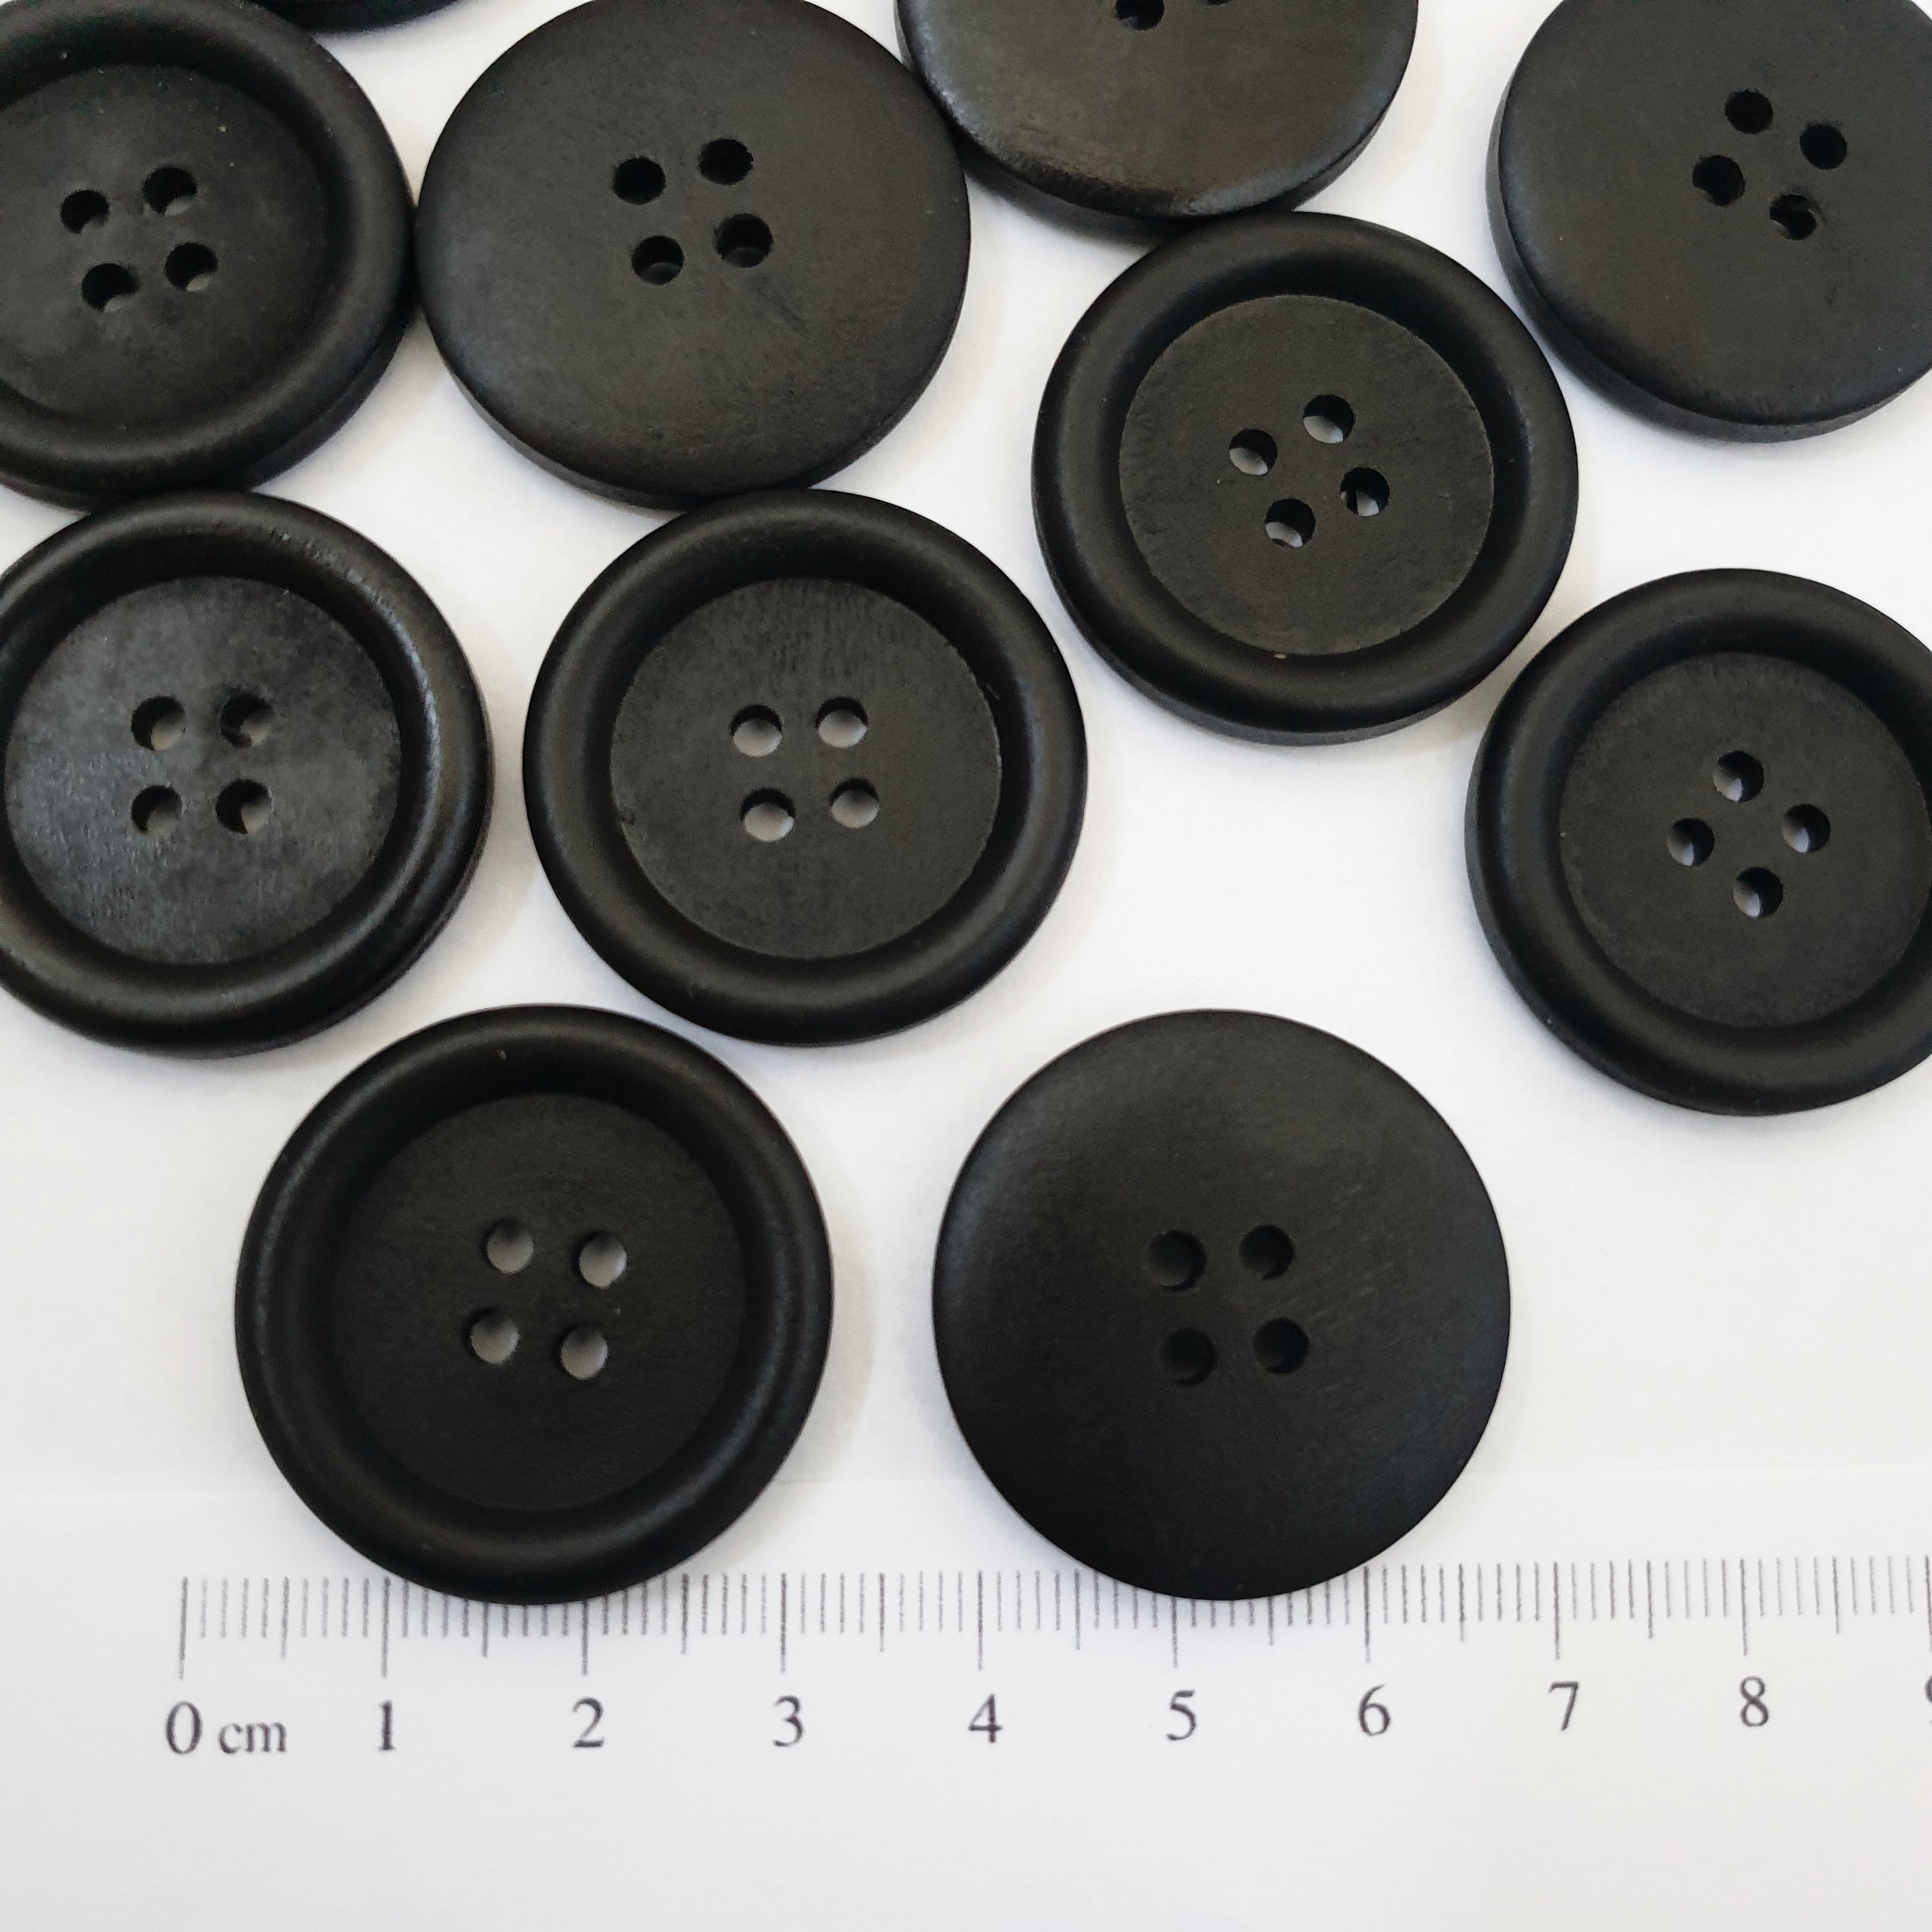 MajorCrafts 16pcs 30mm Black 4 Holes Round Large Wooden Sewing Buttons